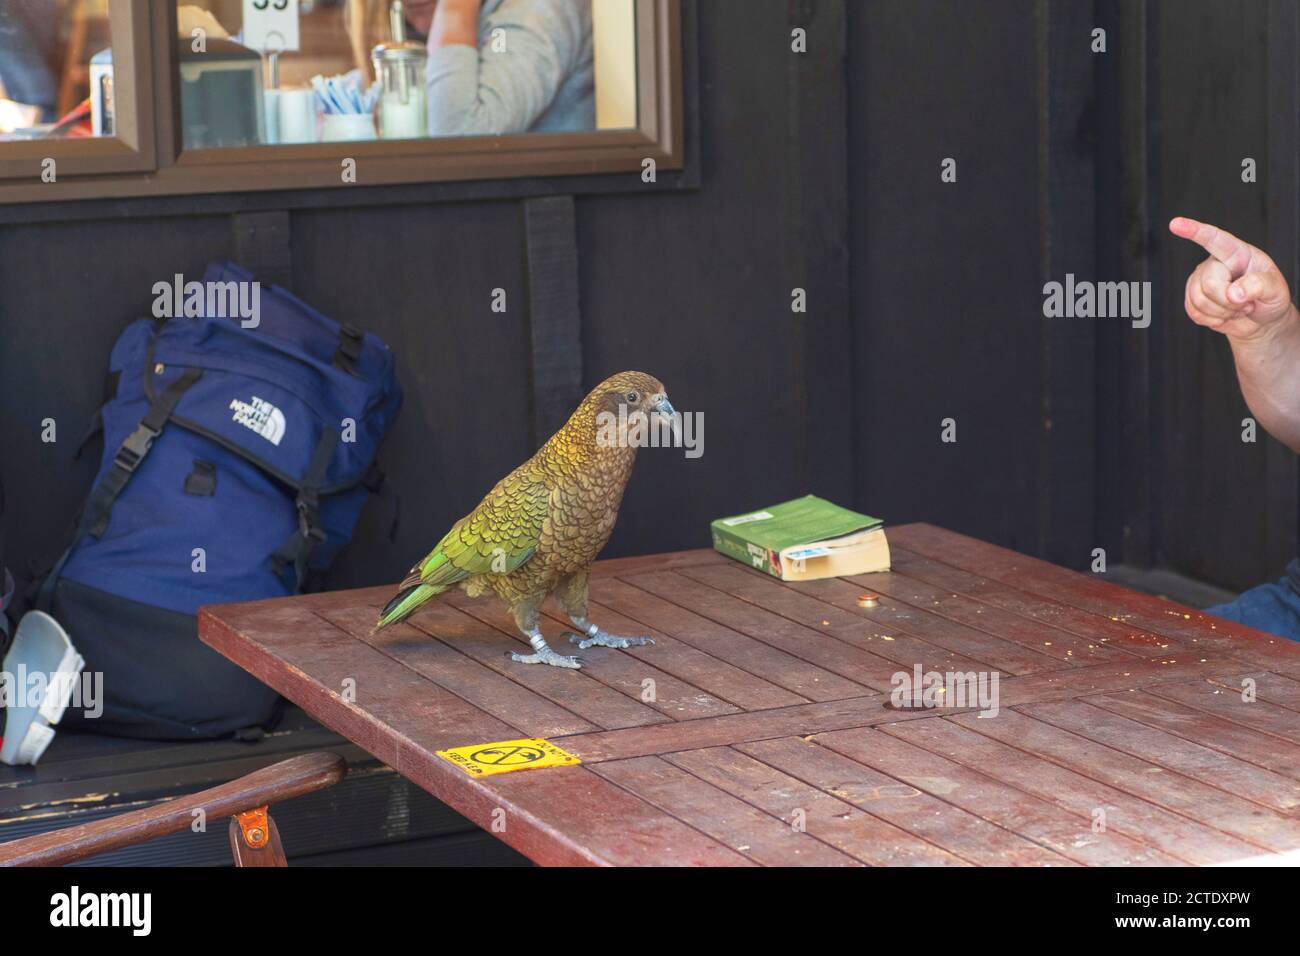 kea (Nestor notabilis), standing on a table at a restaurant, tryint to steal food, New Zealand, Southern Island Stock Photo